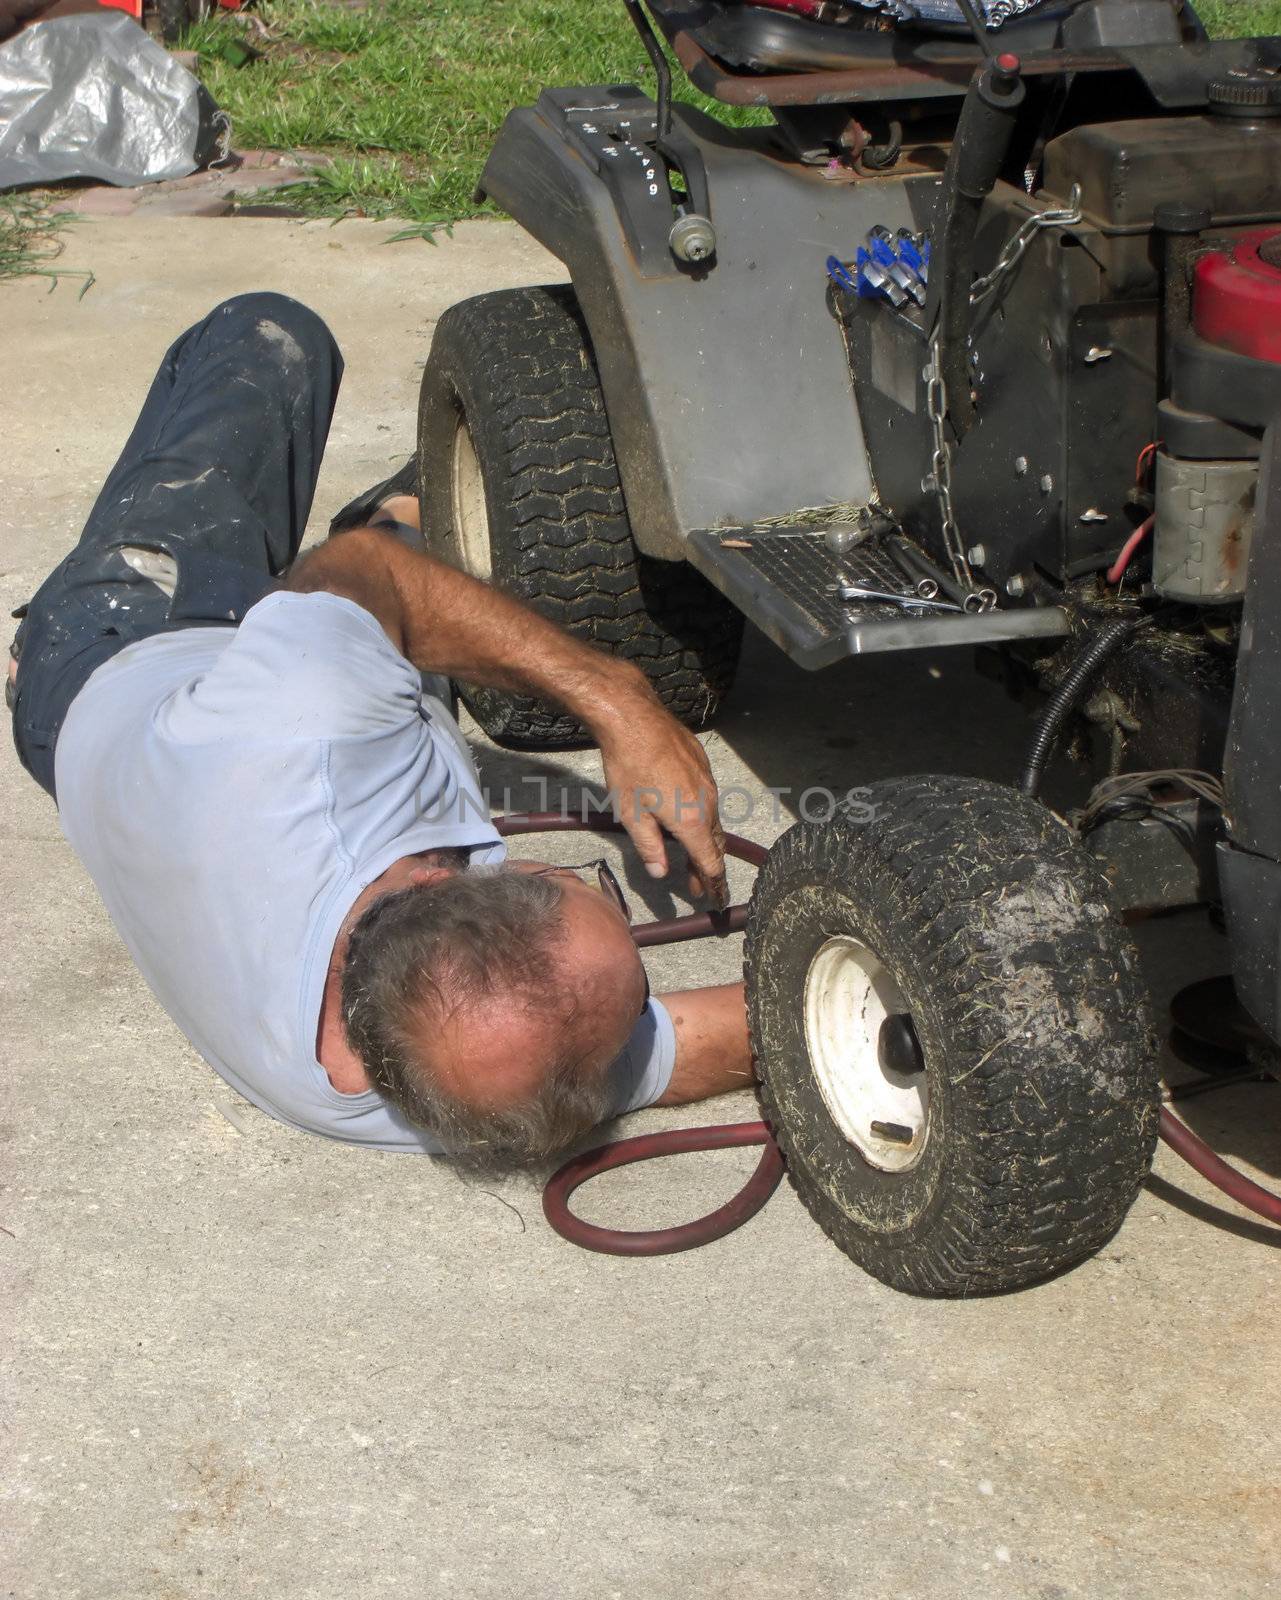 A man is lying on the ground and he is fixing an old lawn mower.